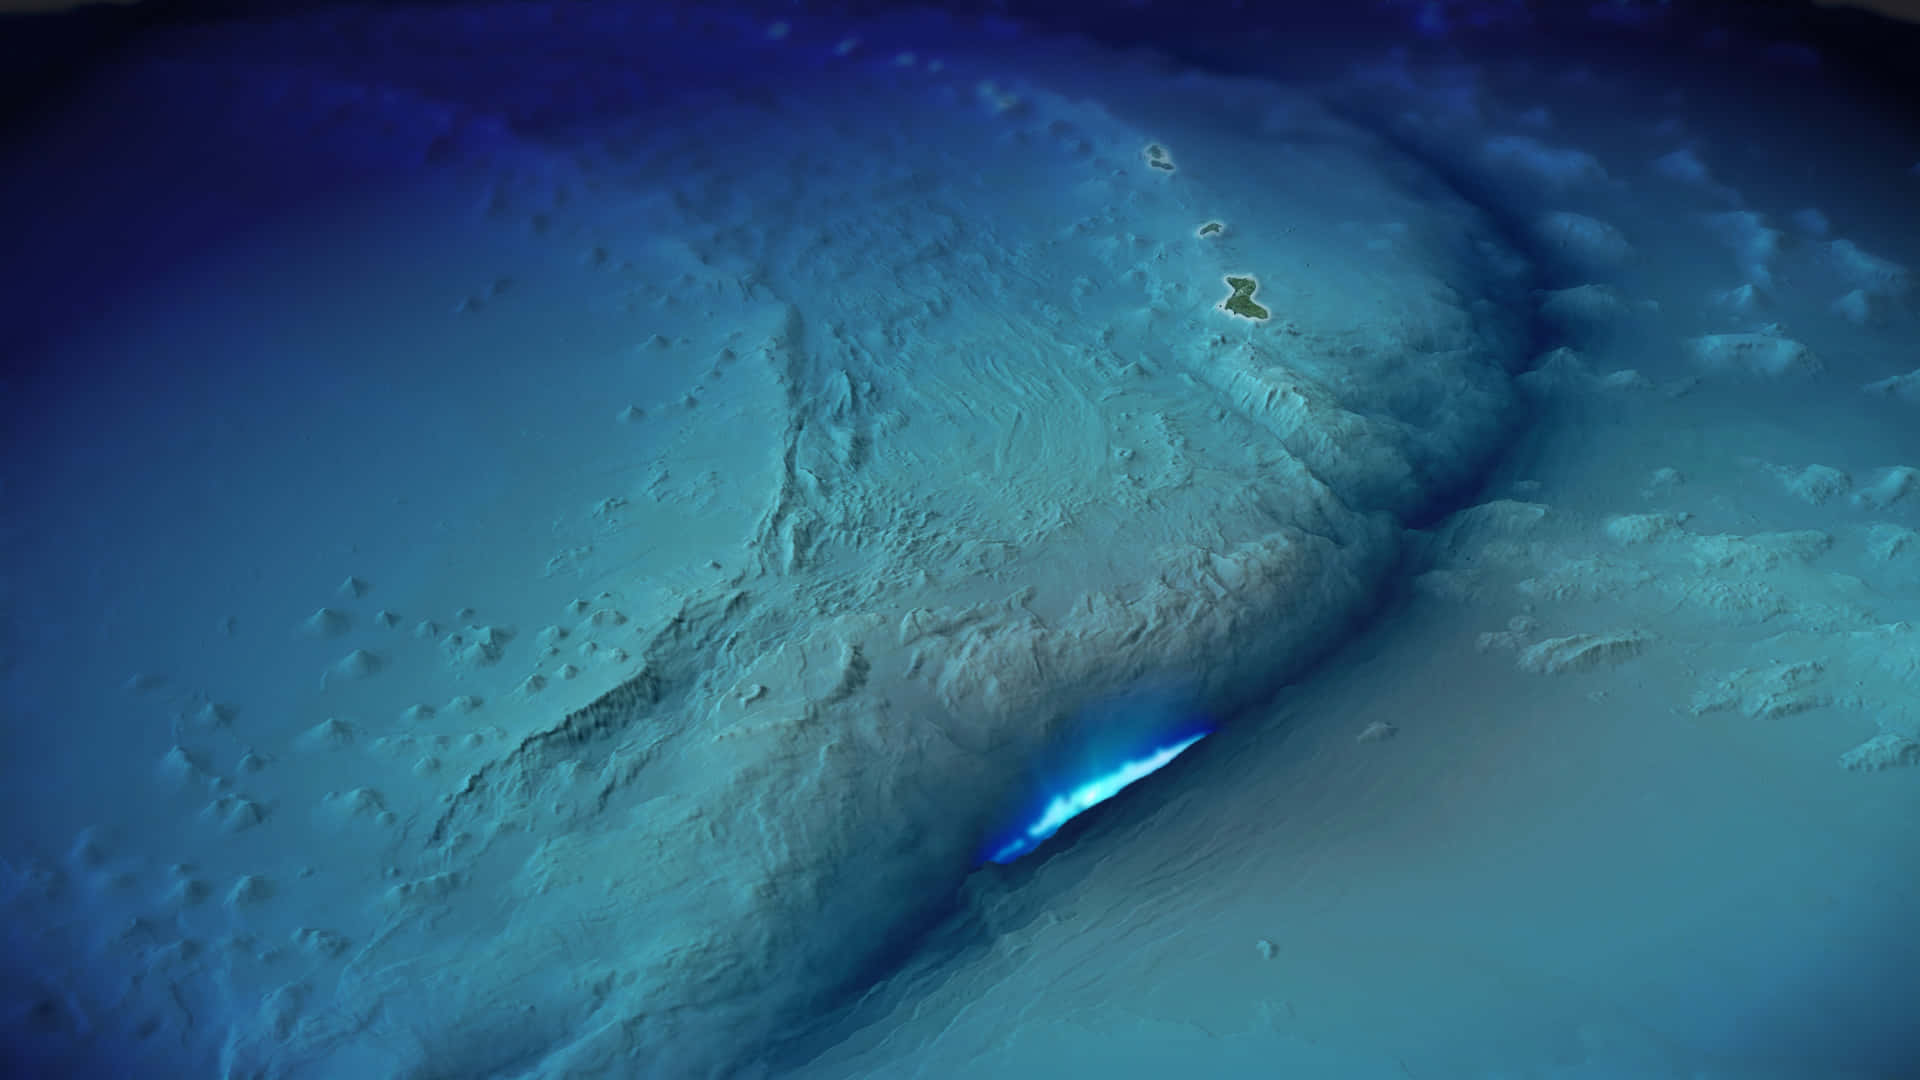 A stunning view of the Mariana Trench